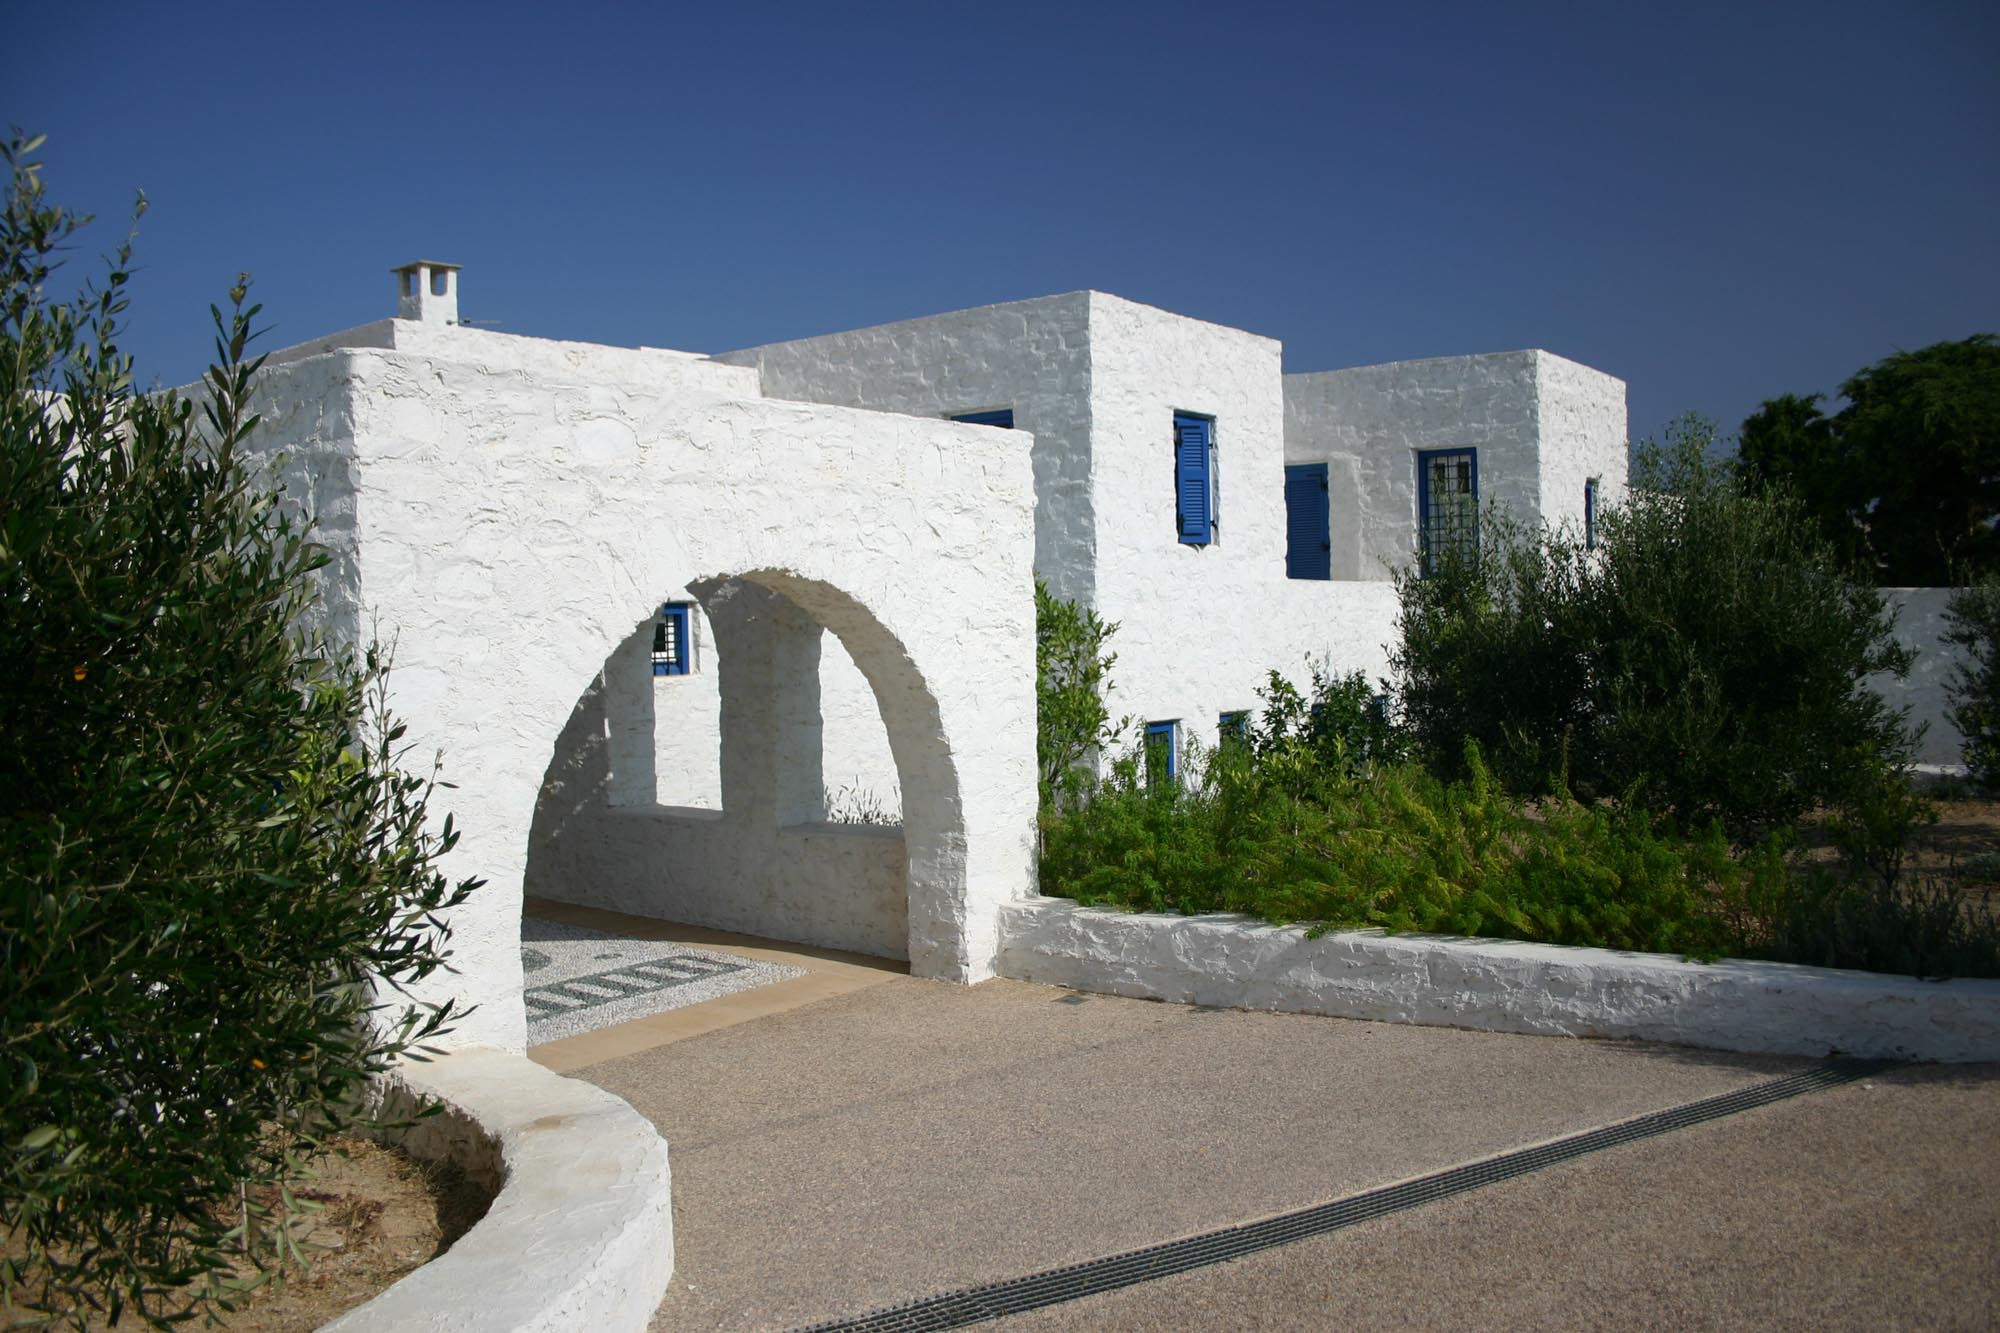 Moustroufis-Architects-Residence-AD Vacation House in Paros